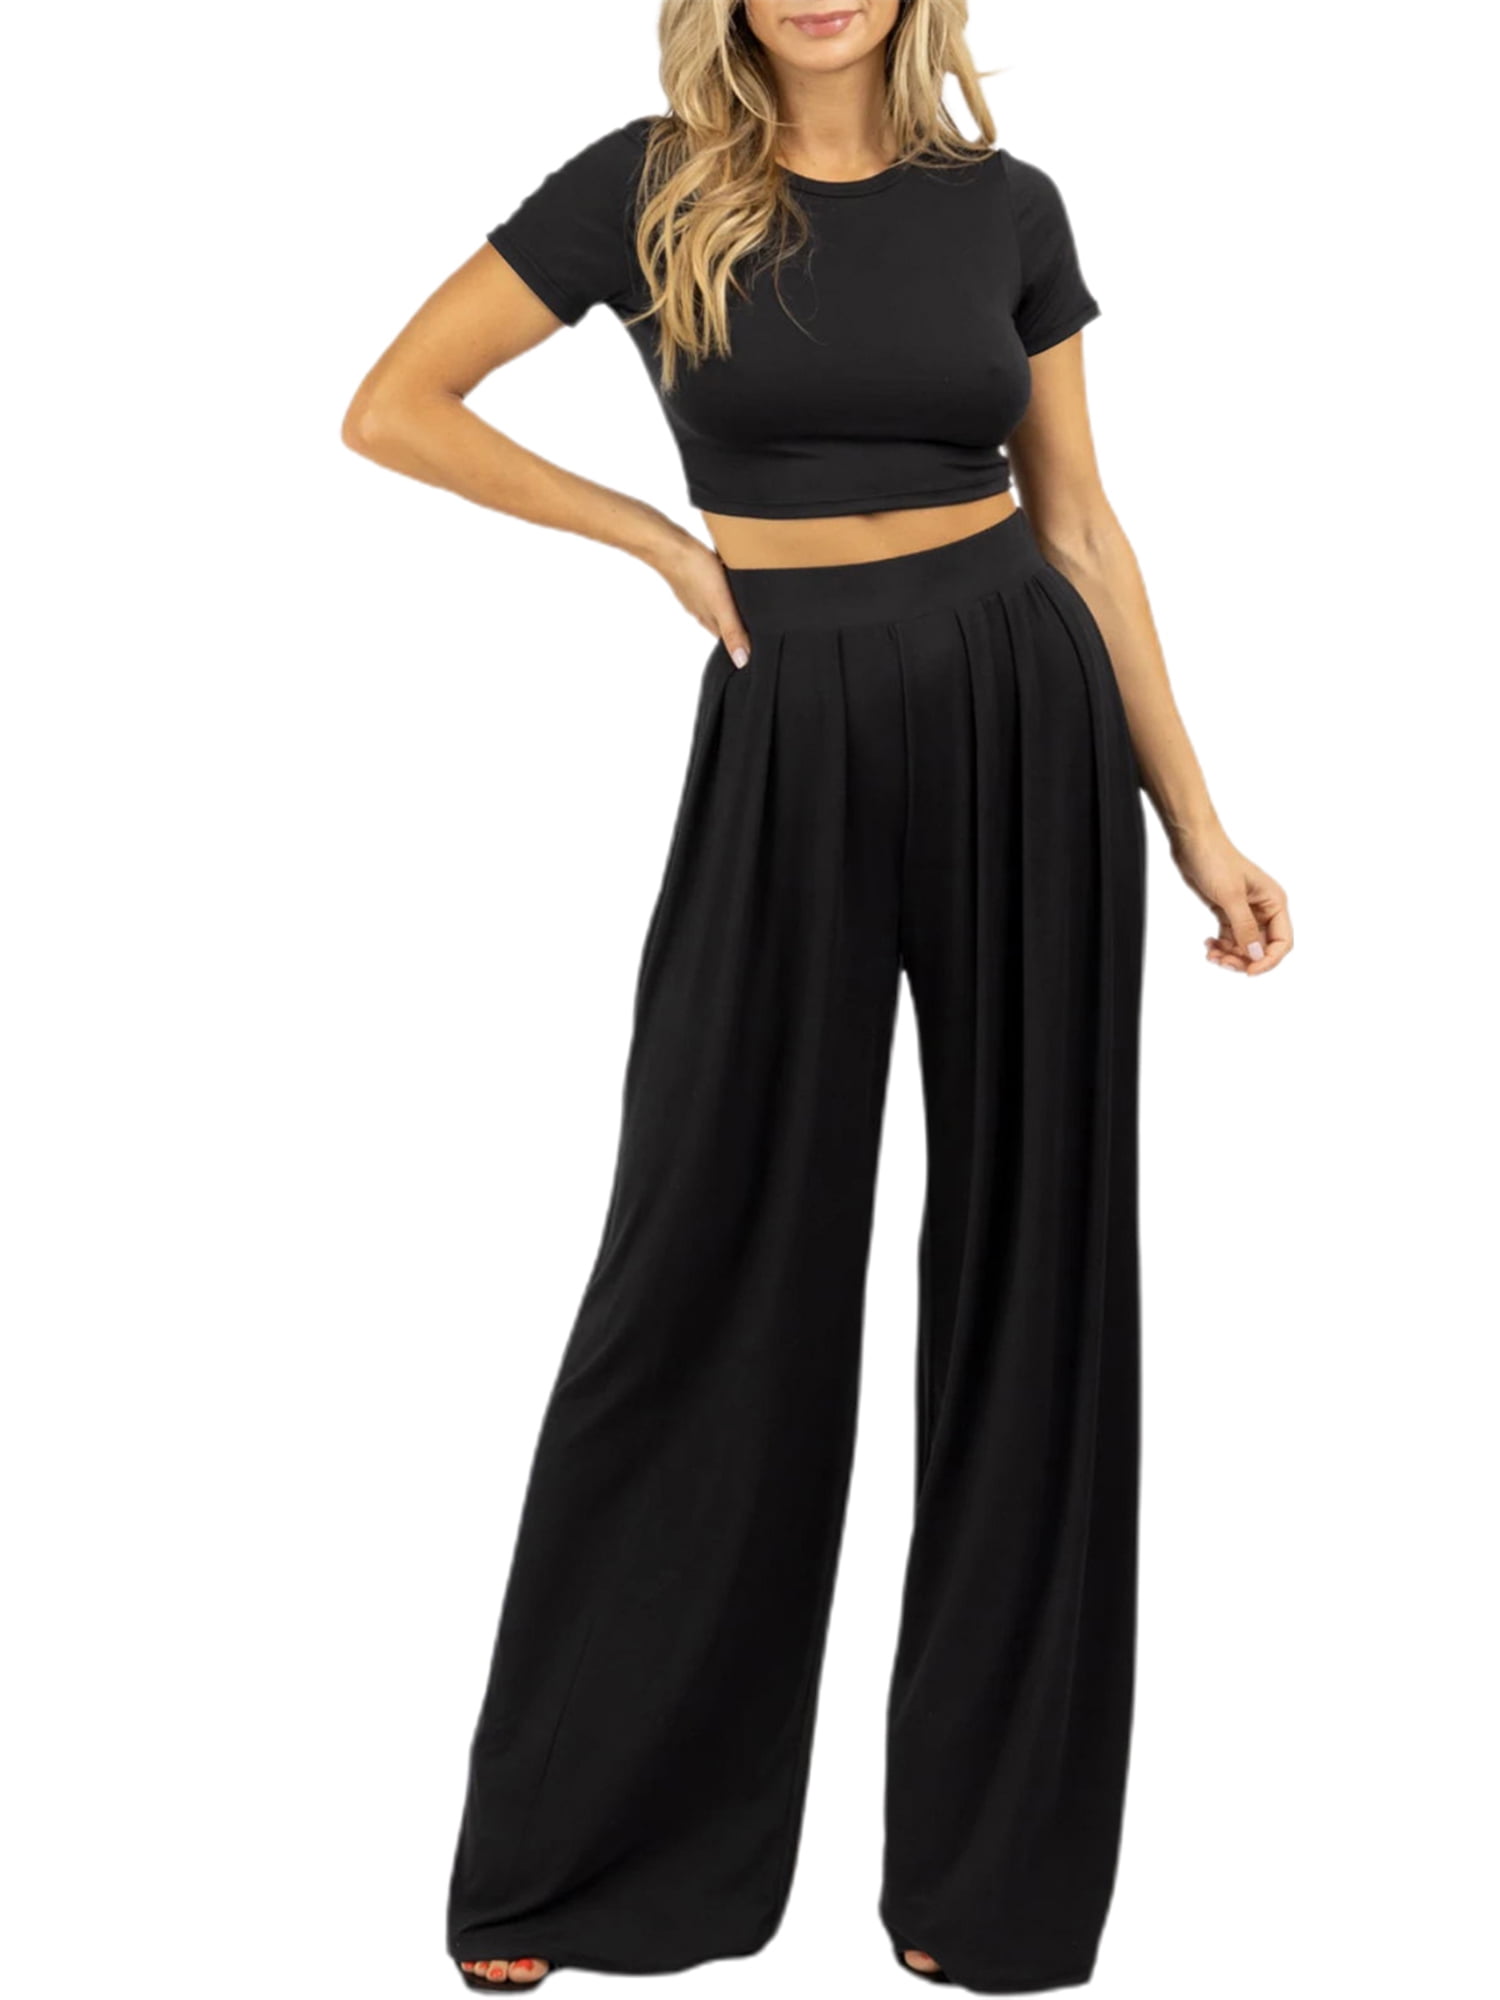 Wide Leg Pant Suits for Women Elegant 2 Piece Solid Outfits Off Sholder Sleeve Crop Top High Waist Long Pants with Pockets 